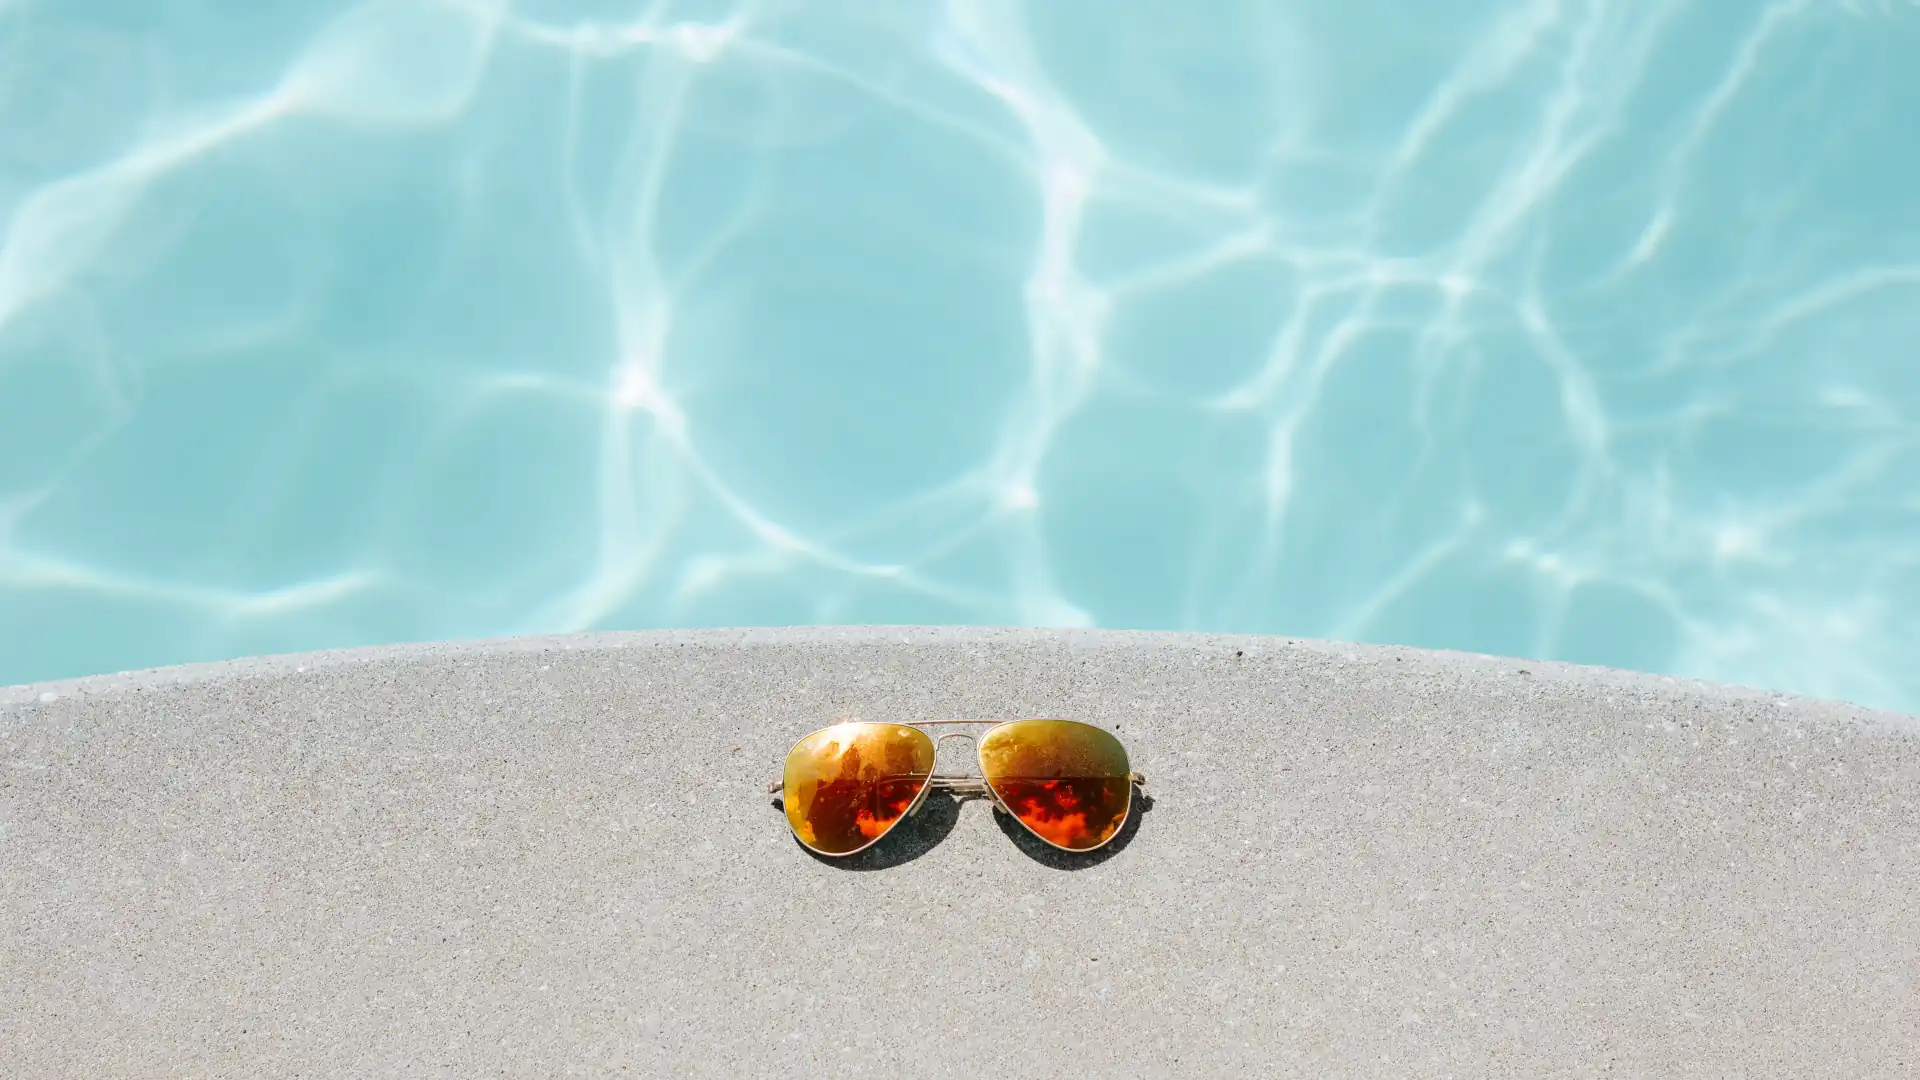 How much does a concrete pool cost – Sunglasses by the edge of a pool